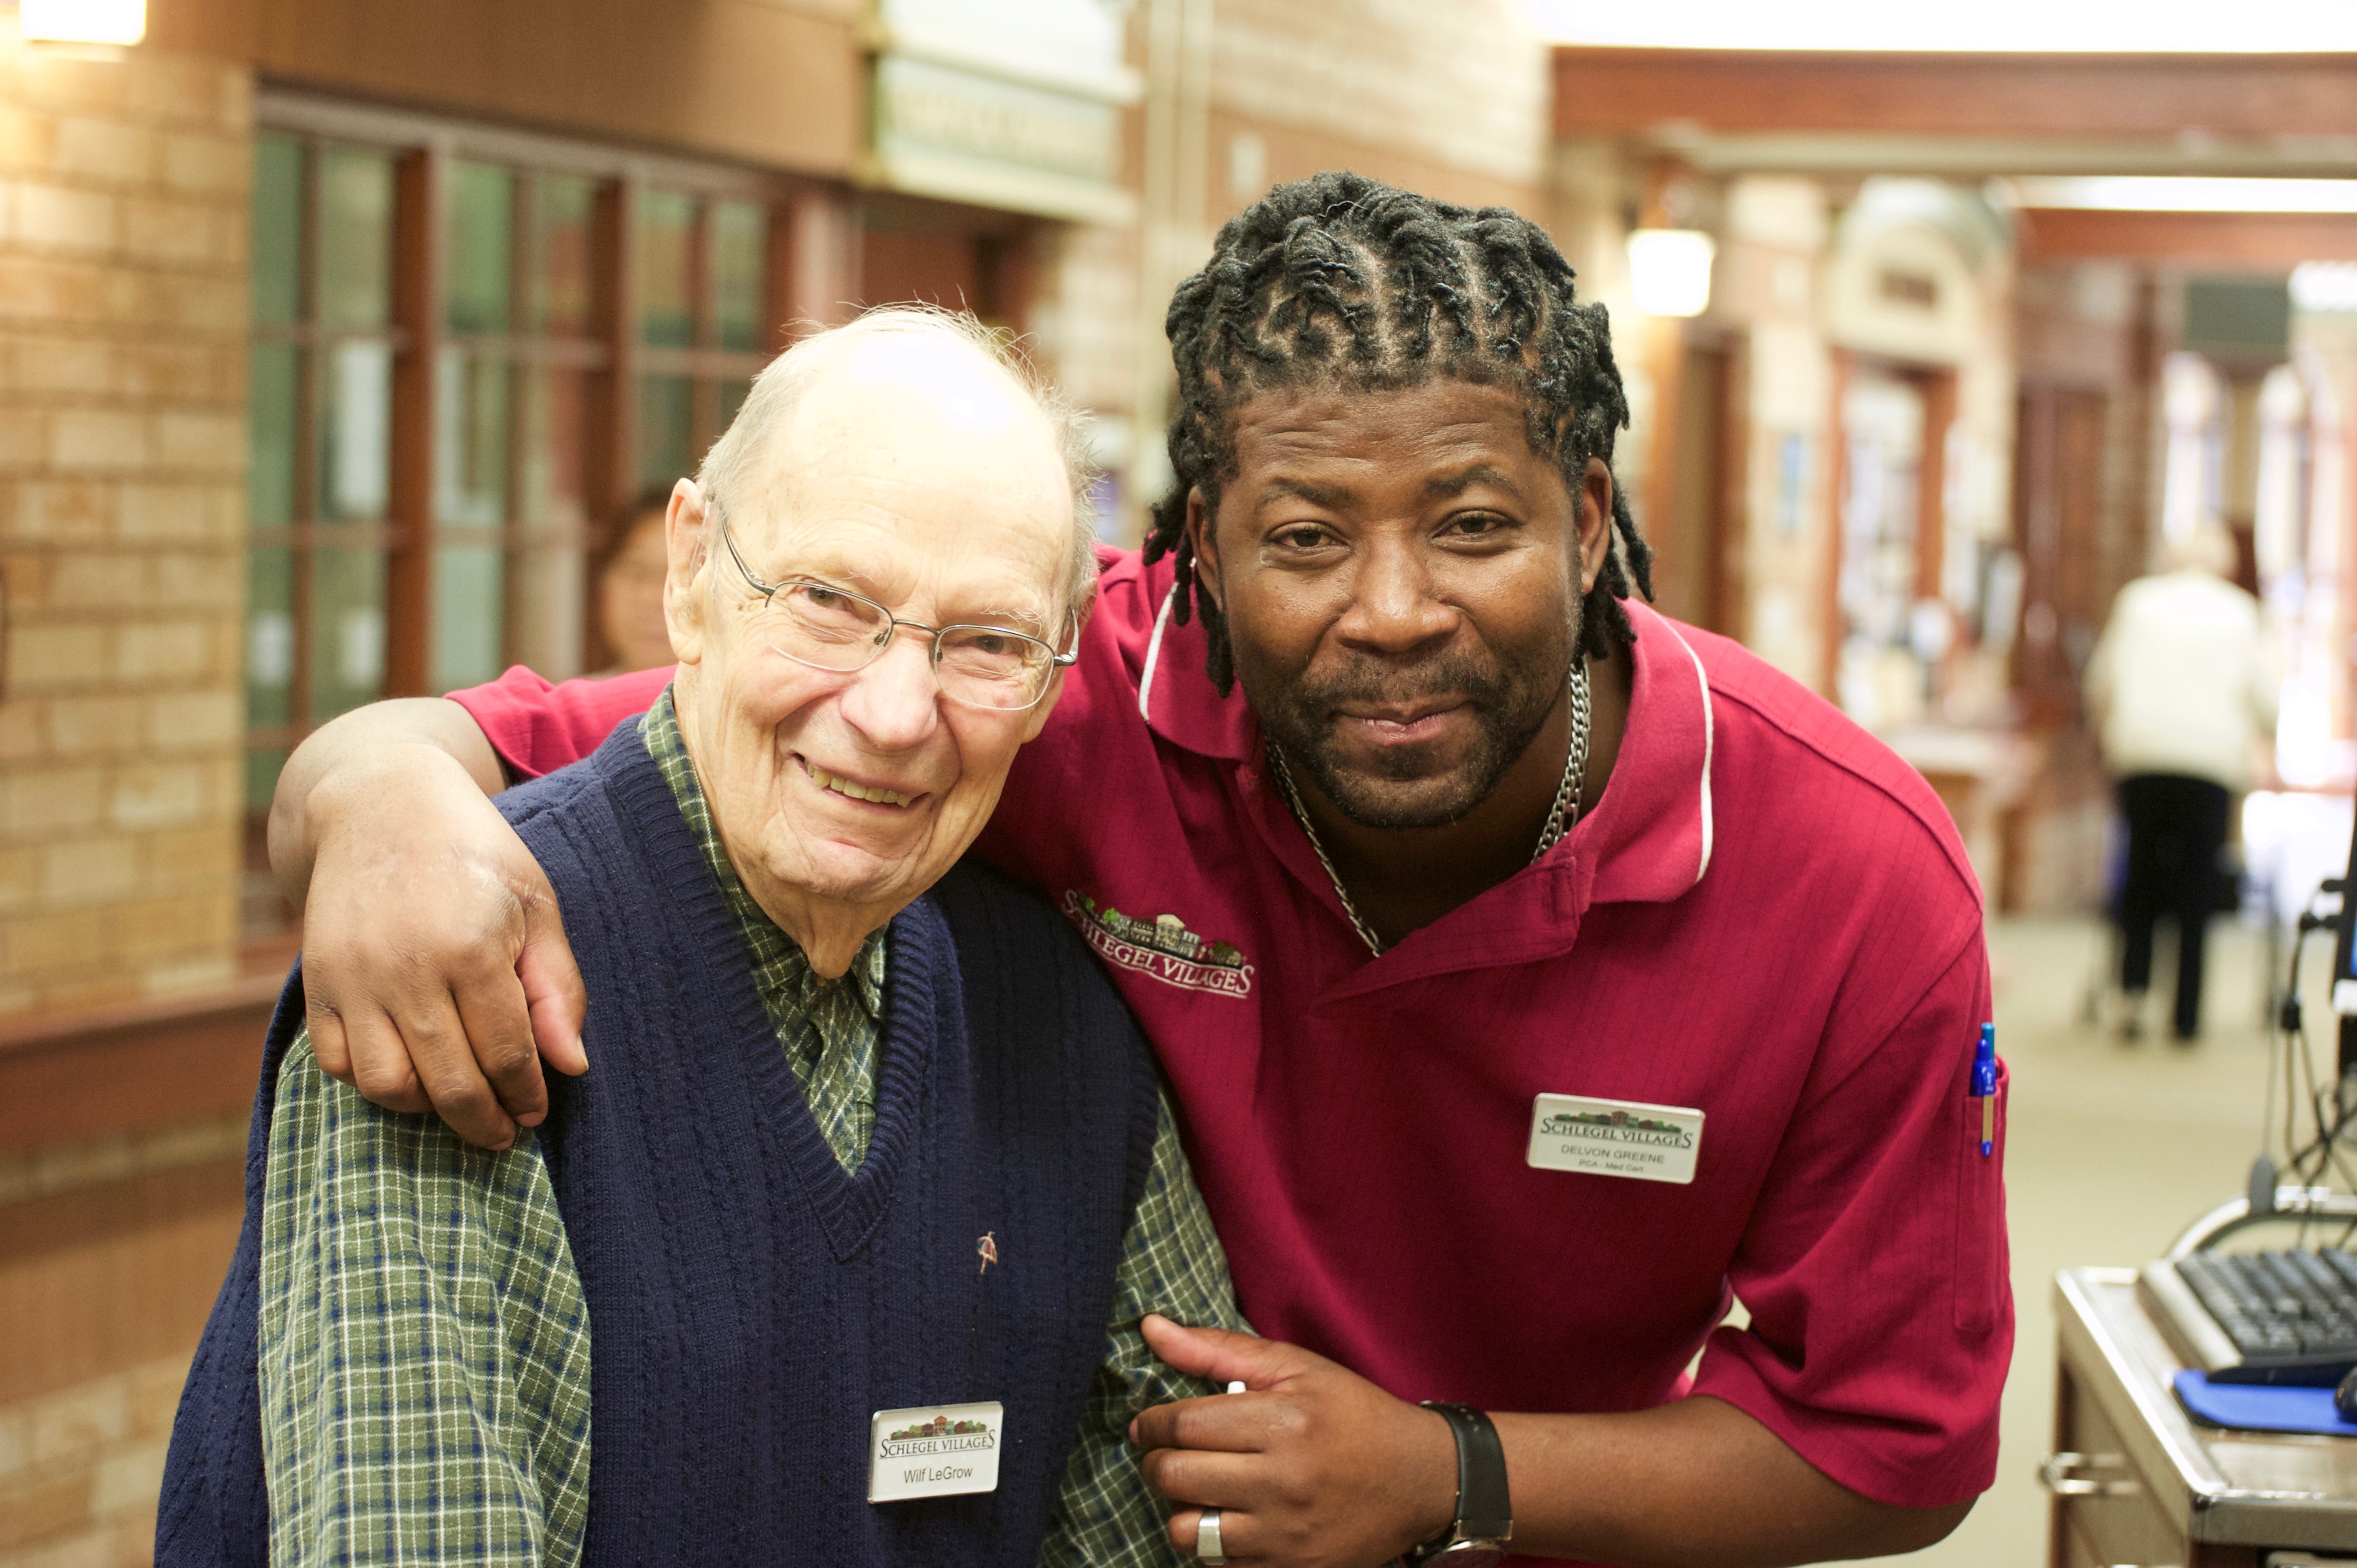 Schlegel Villages team member poses with senior man for a photo on main street at the village